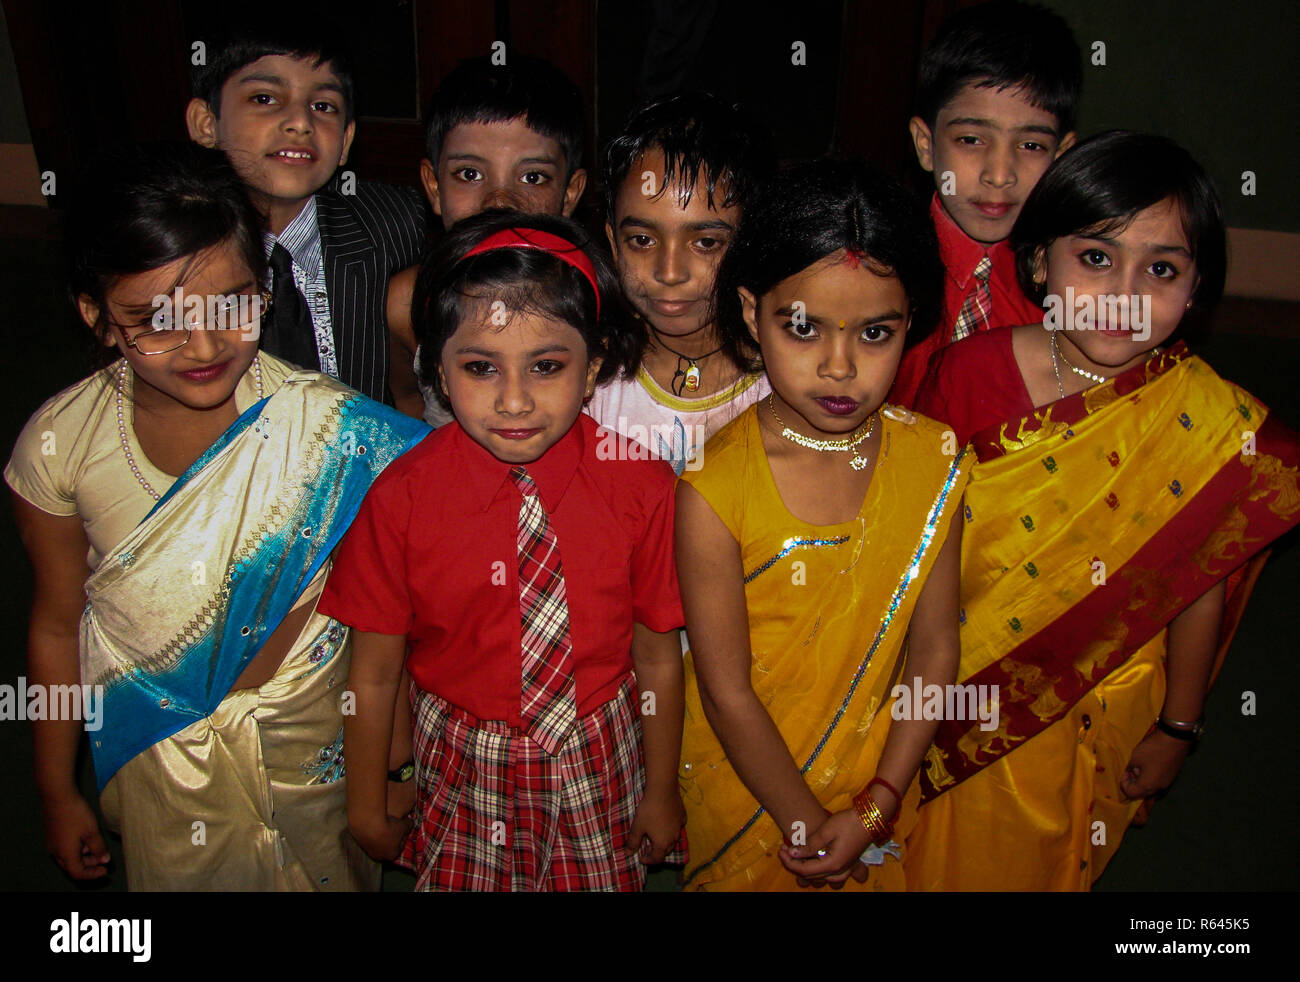 Young kids like dressing up, this is a photo of group of Indian school ...